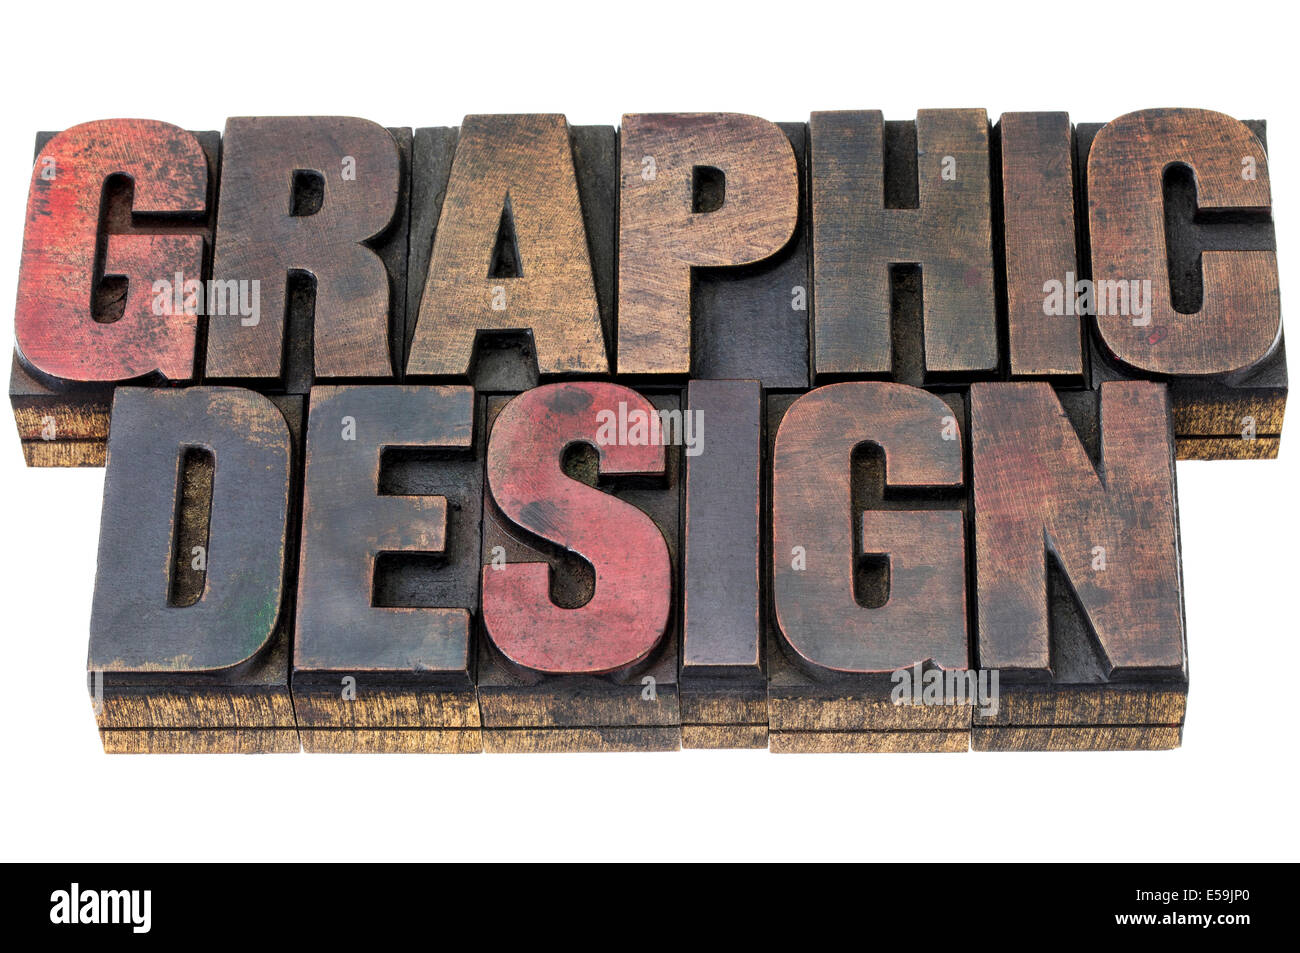 graphic design in vintage grunge letterpress wood type stained by inks Stock Photo